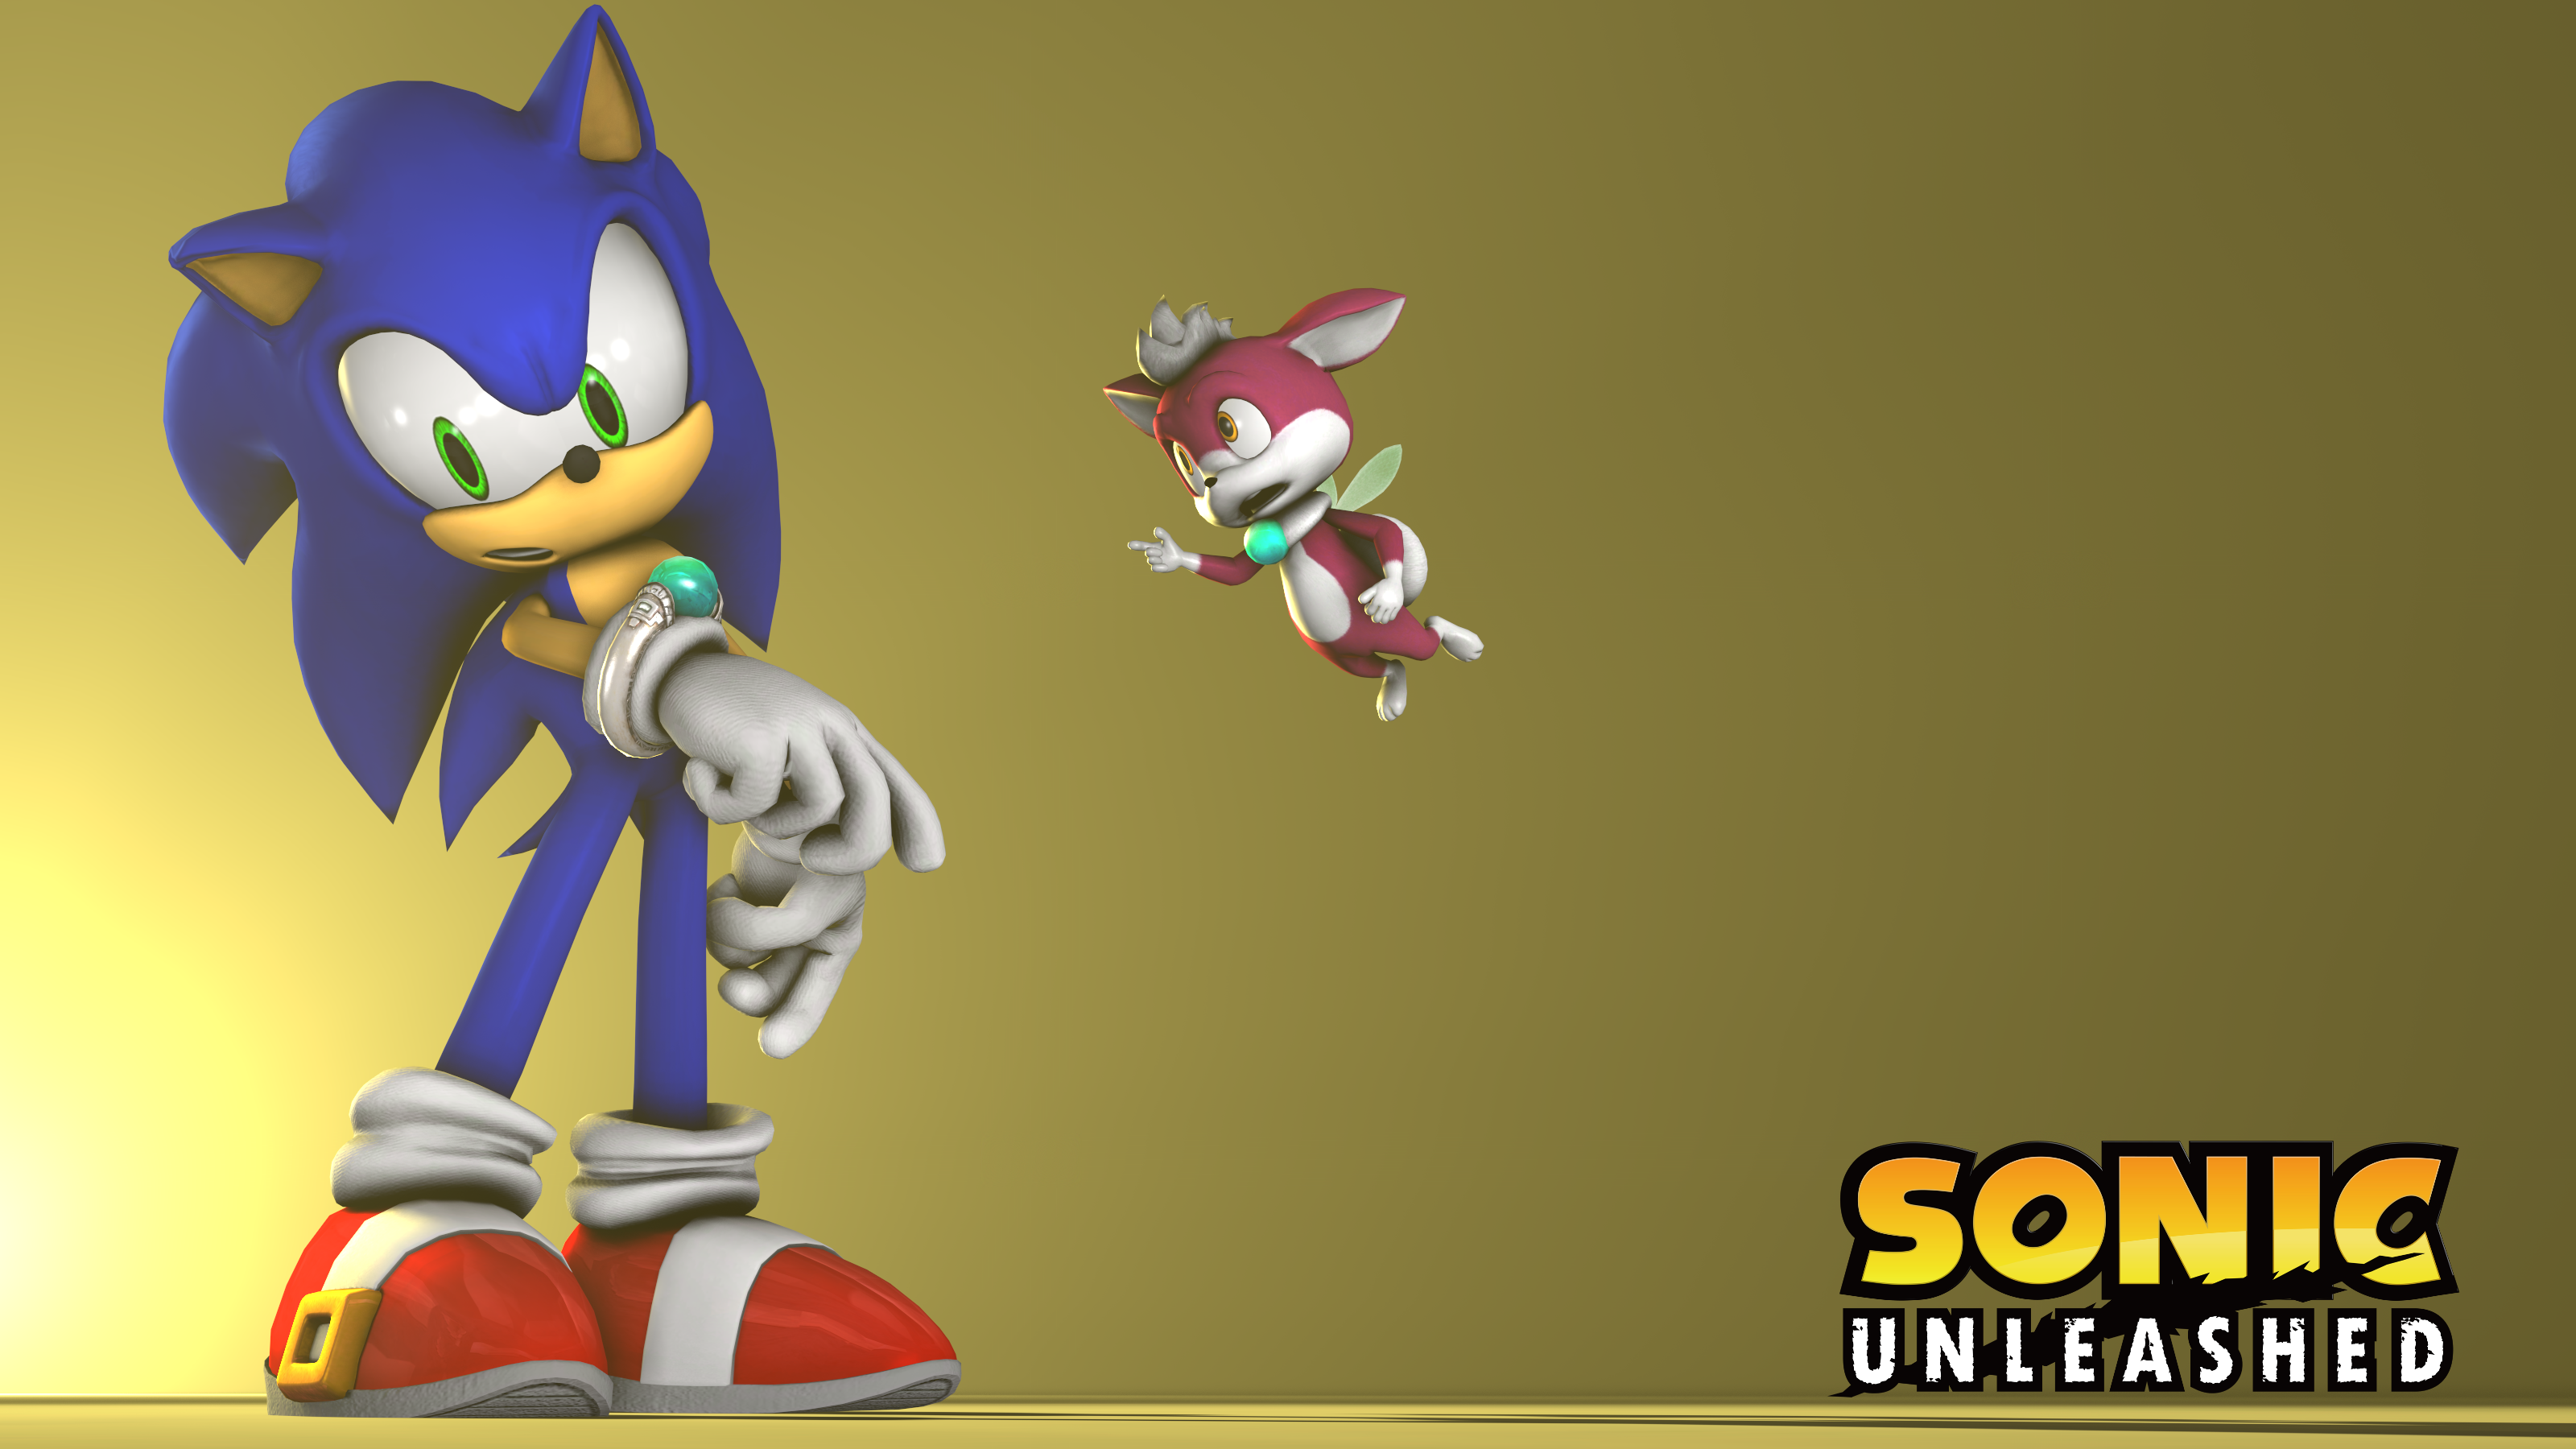 Sonic Unleashed Wallpaper Sunrise By Lunicaura106 On